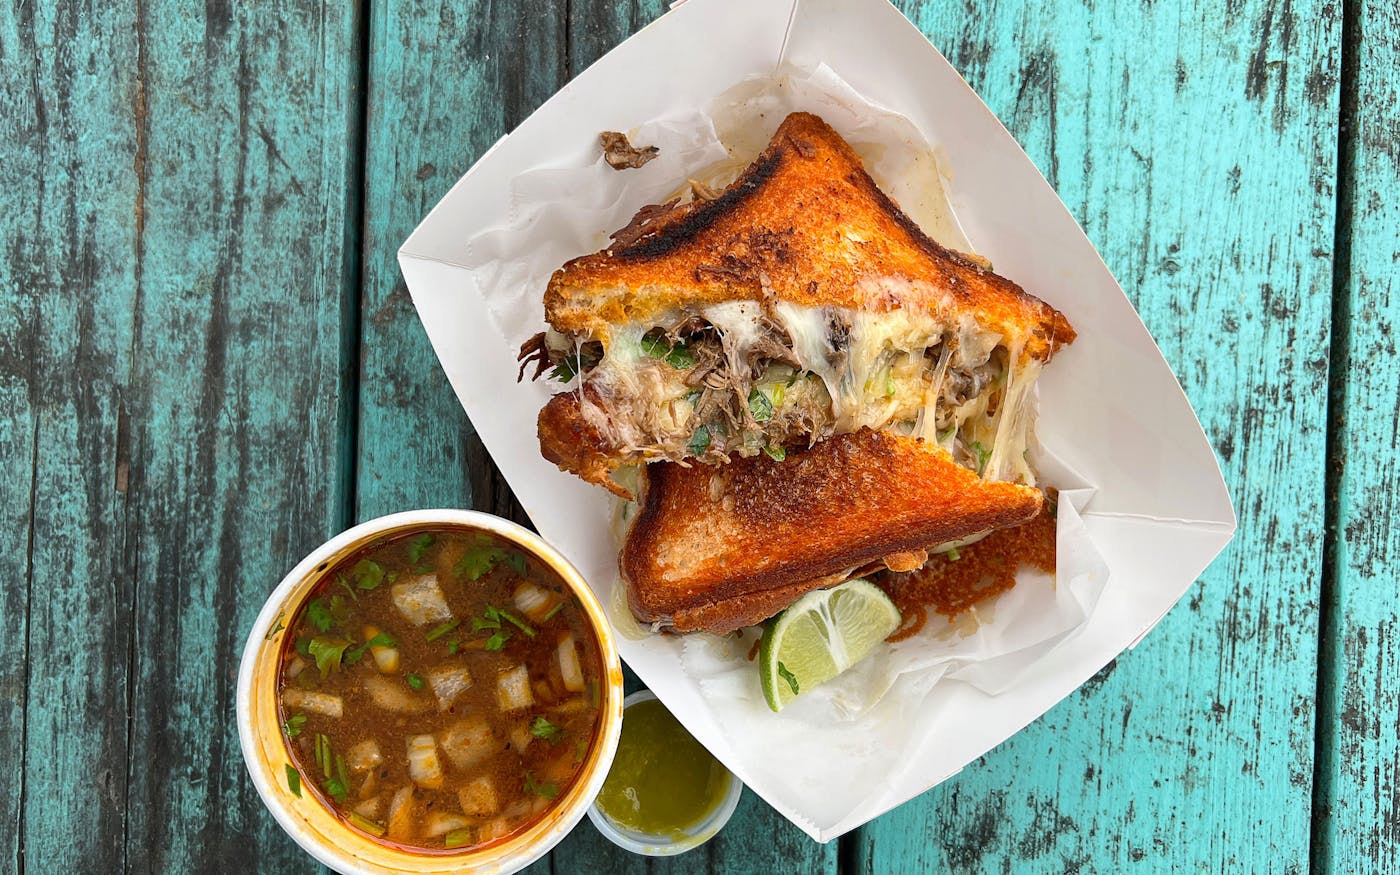 Grilled Mexican Cheese Sandwich - Oh Sweet Basil